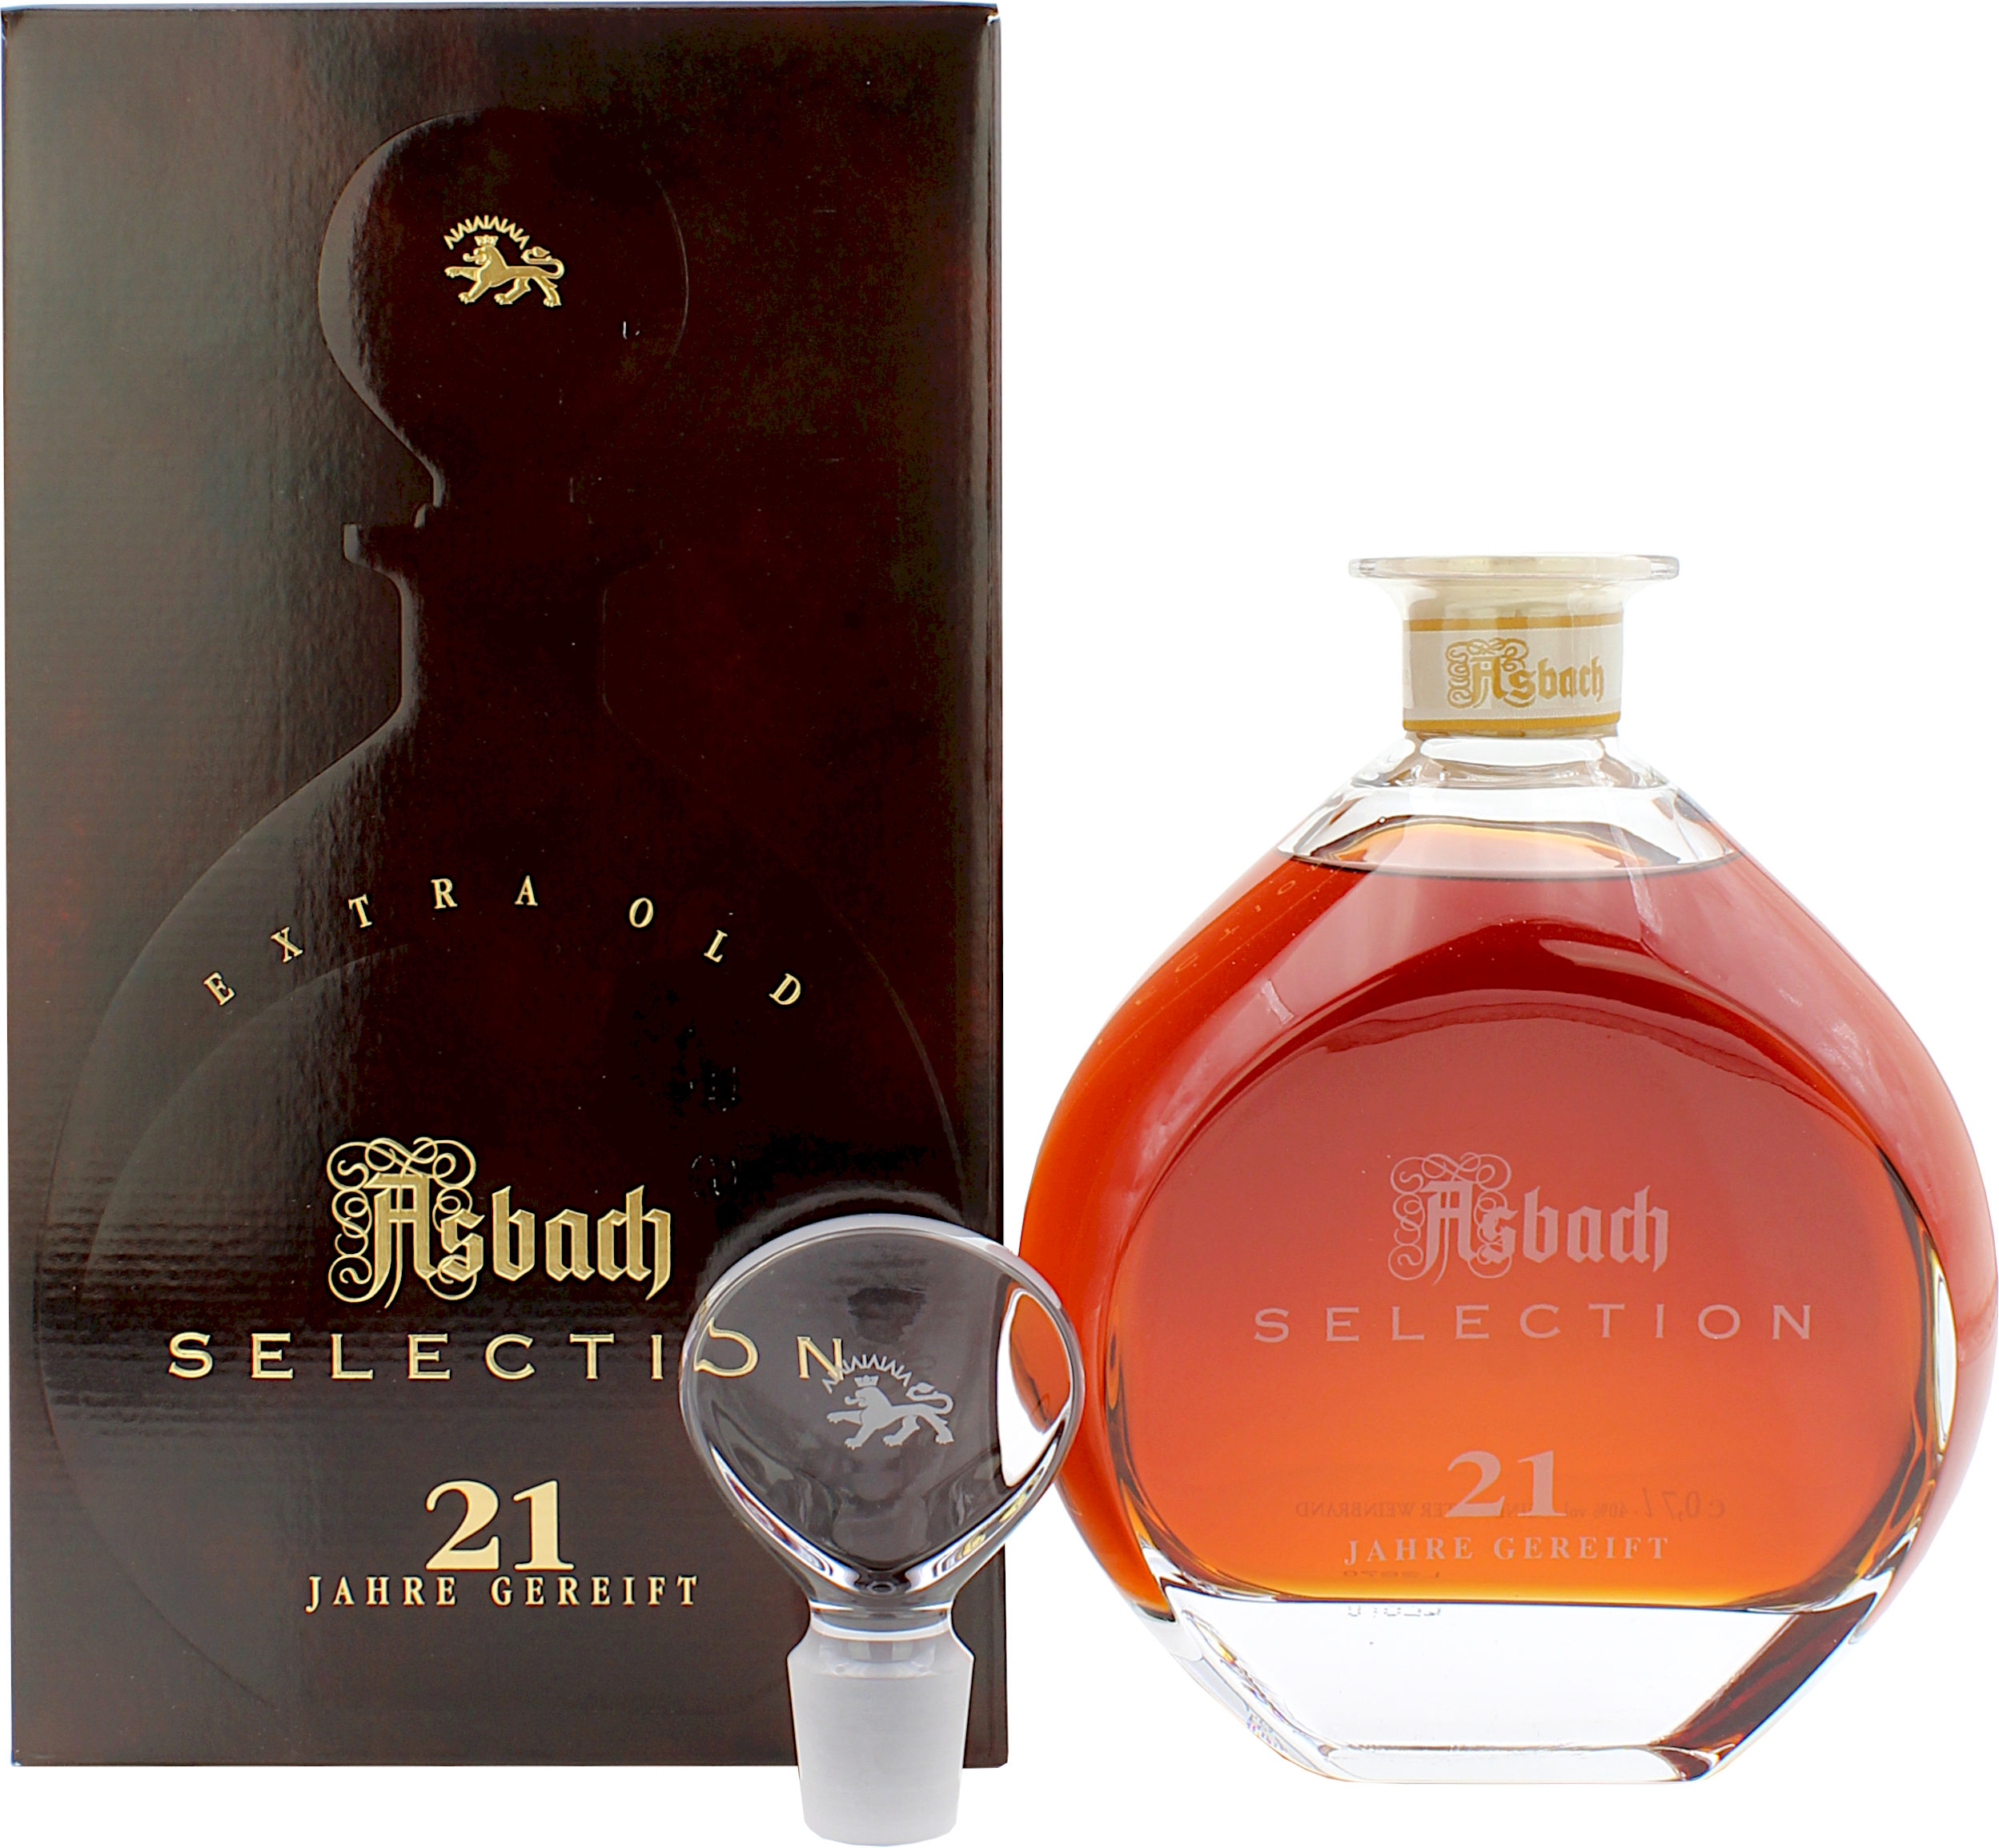 Asbach Selection 21 Jahre 40.0% 0,7l